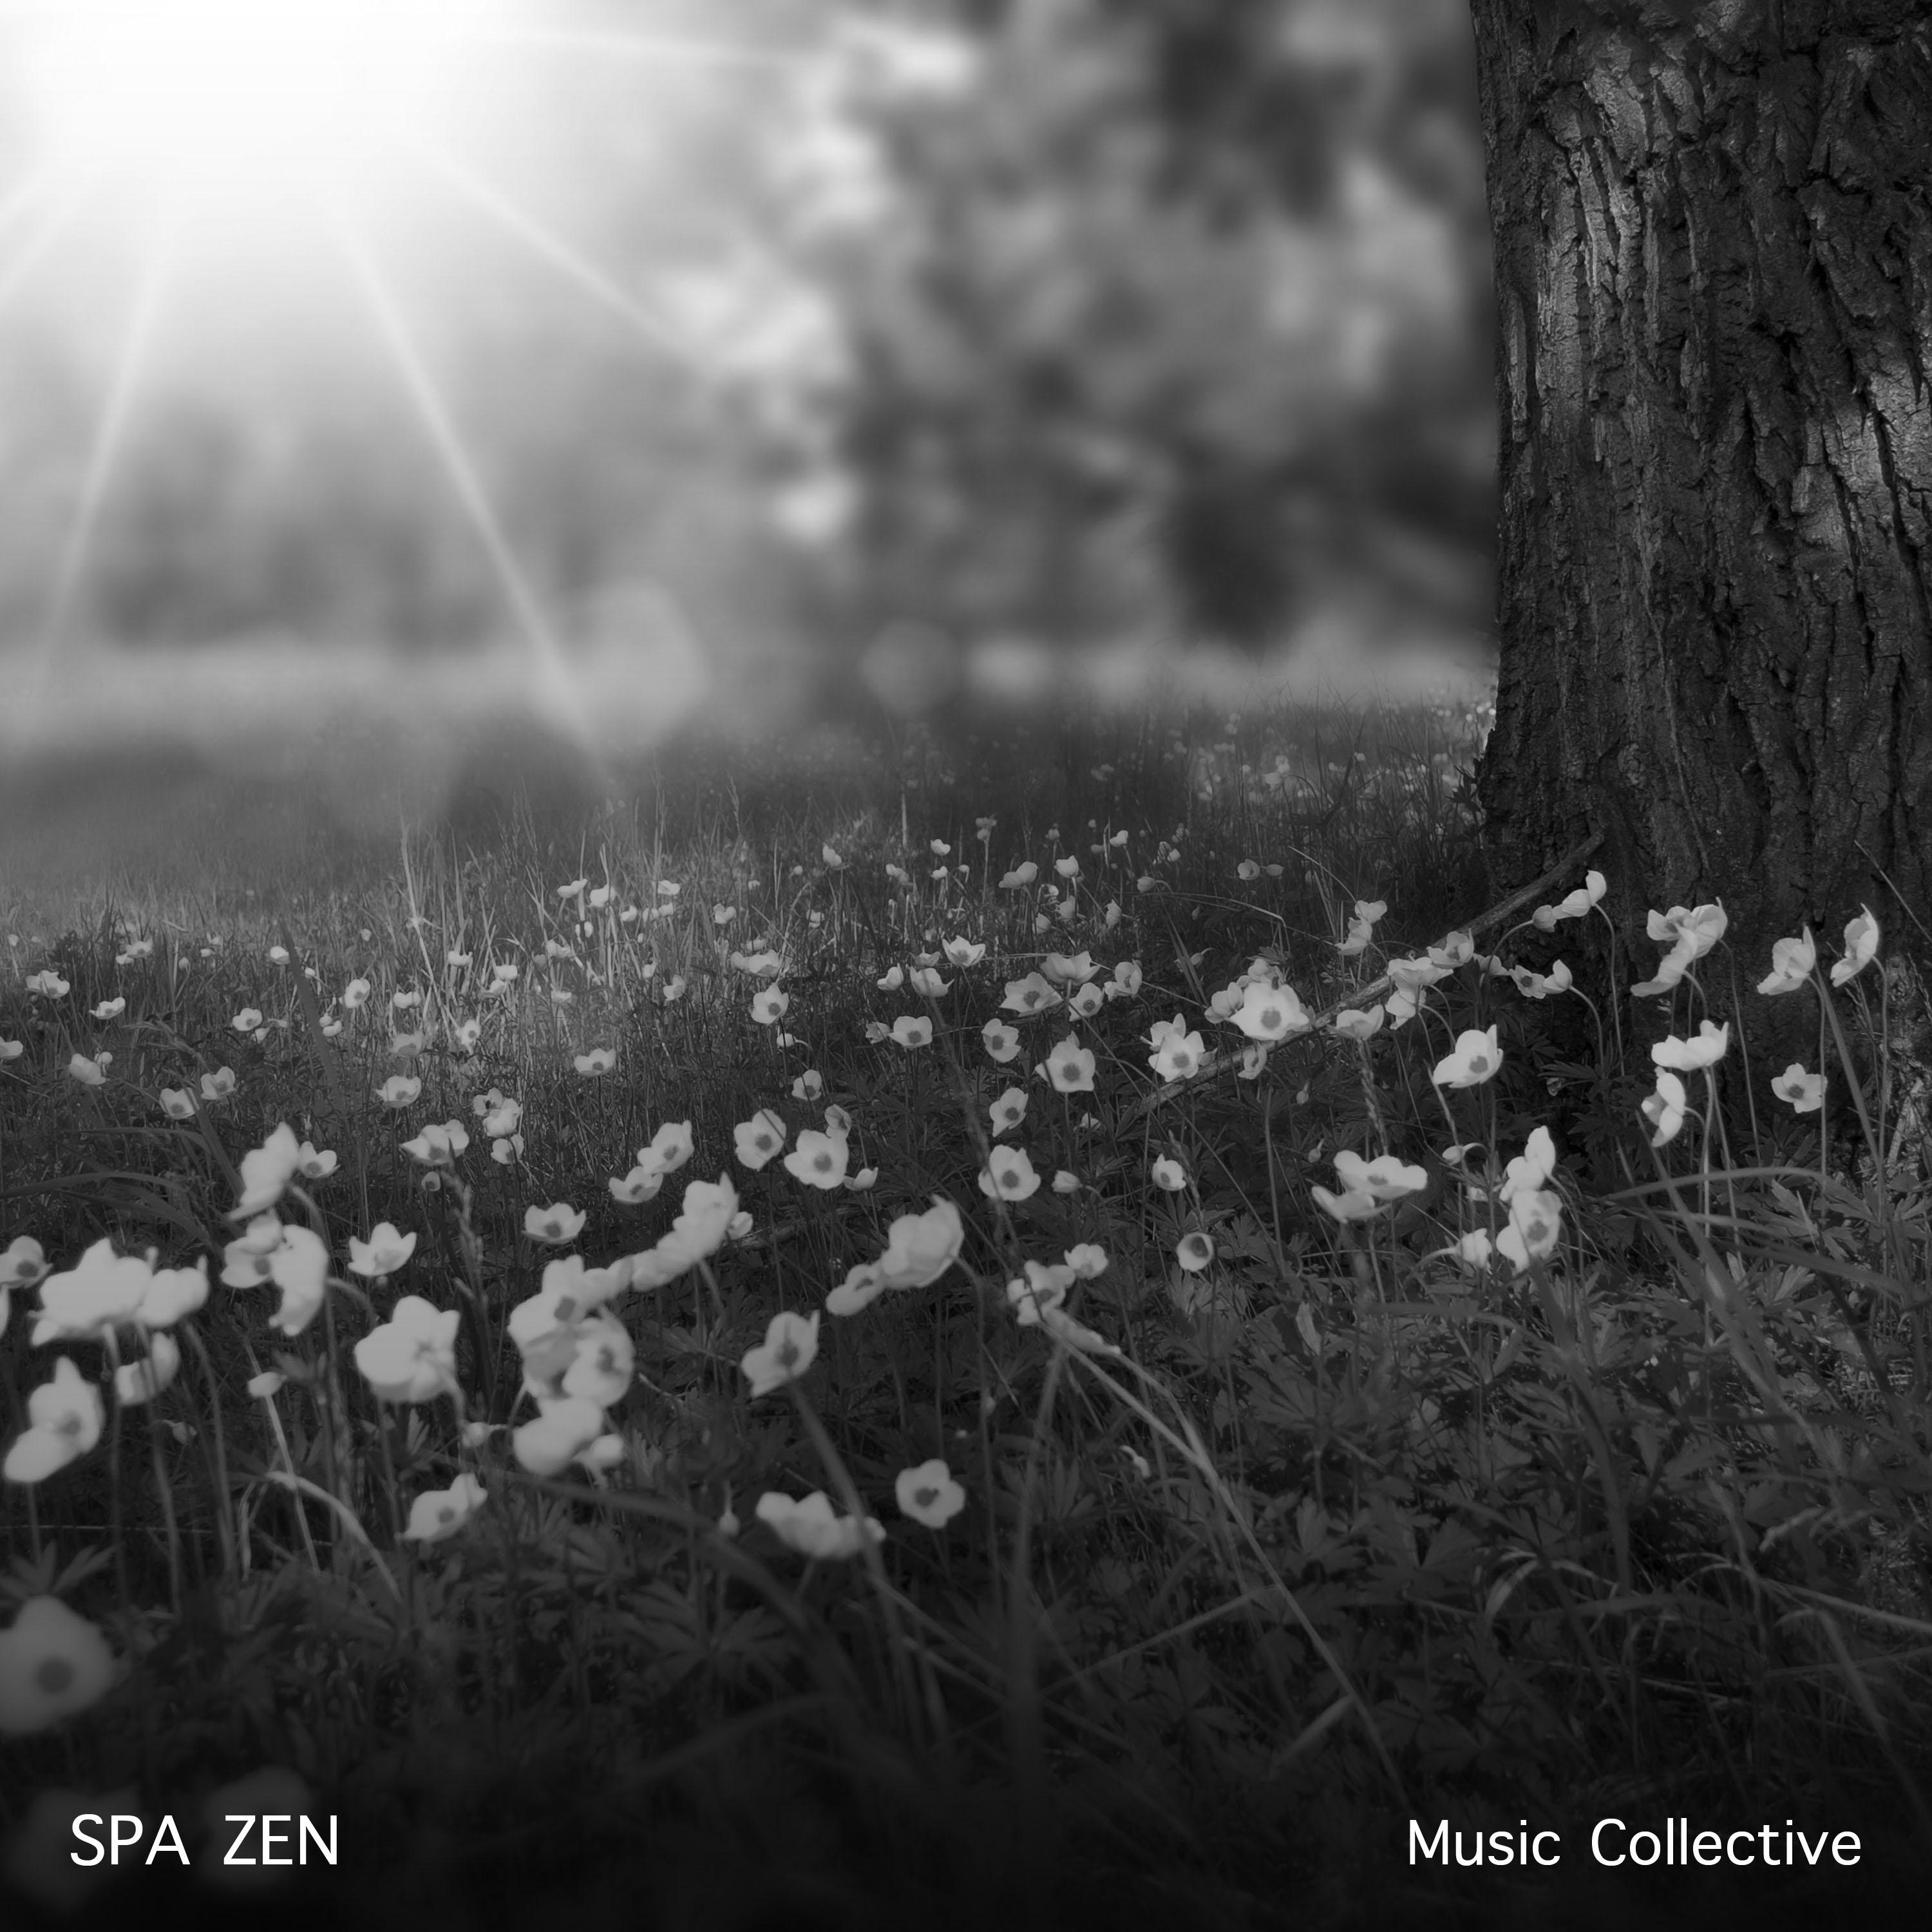 15 Sounds from the Music Collective: Spa Zen